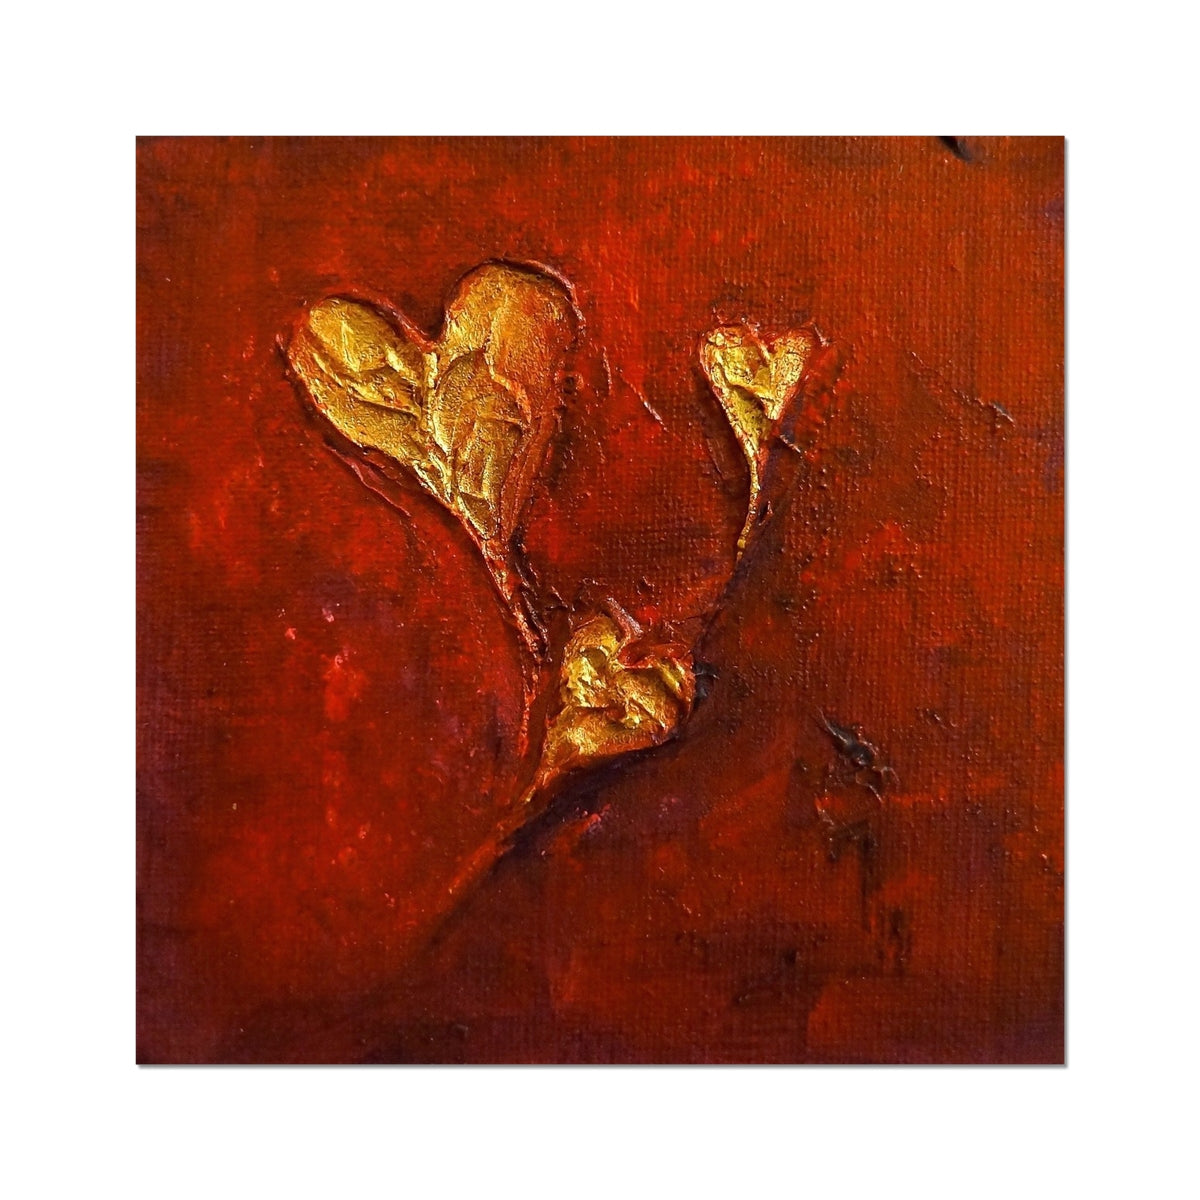 Hearts Abstract Painting | Fine Art Prints From Scotland-Unframed Prints-Abstract & Impressionistic Art Gallery-24"x24"-Paintings, Prints, Homeware, Art Gifts From Scotland By Scottish Artist Kevin Hunter